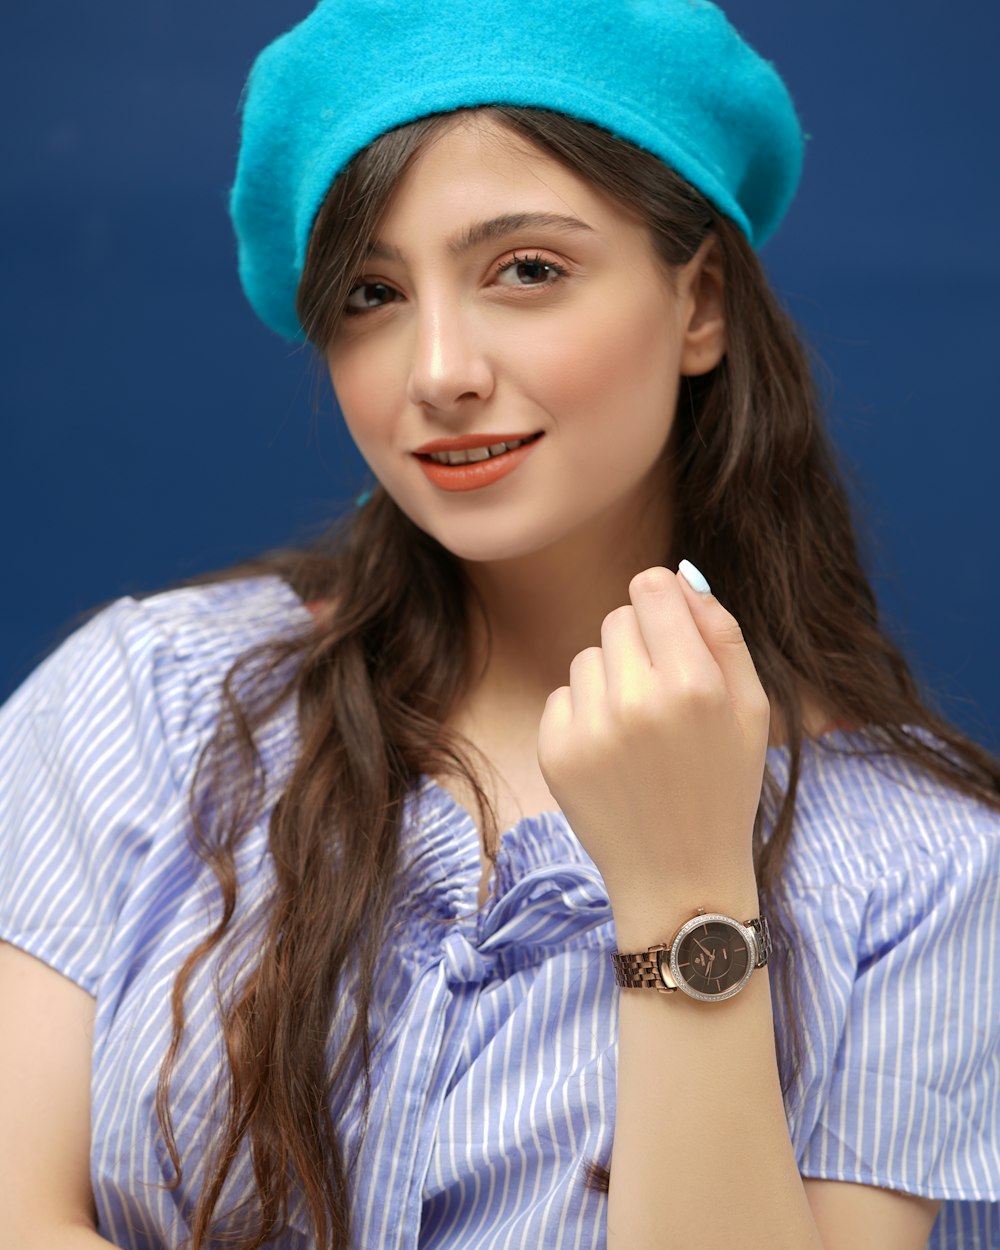 woman in blue and white striped shirt and blue cap